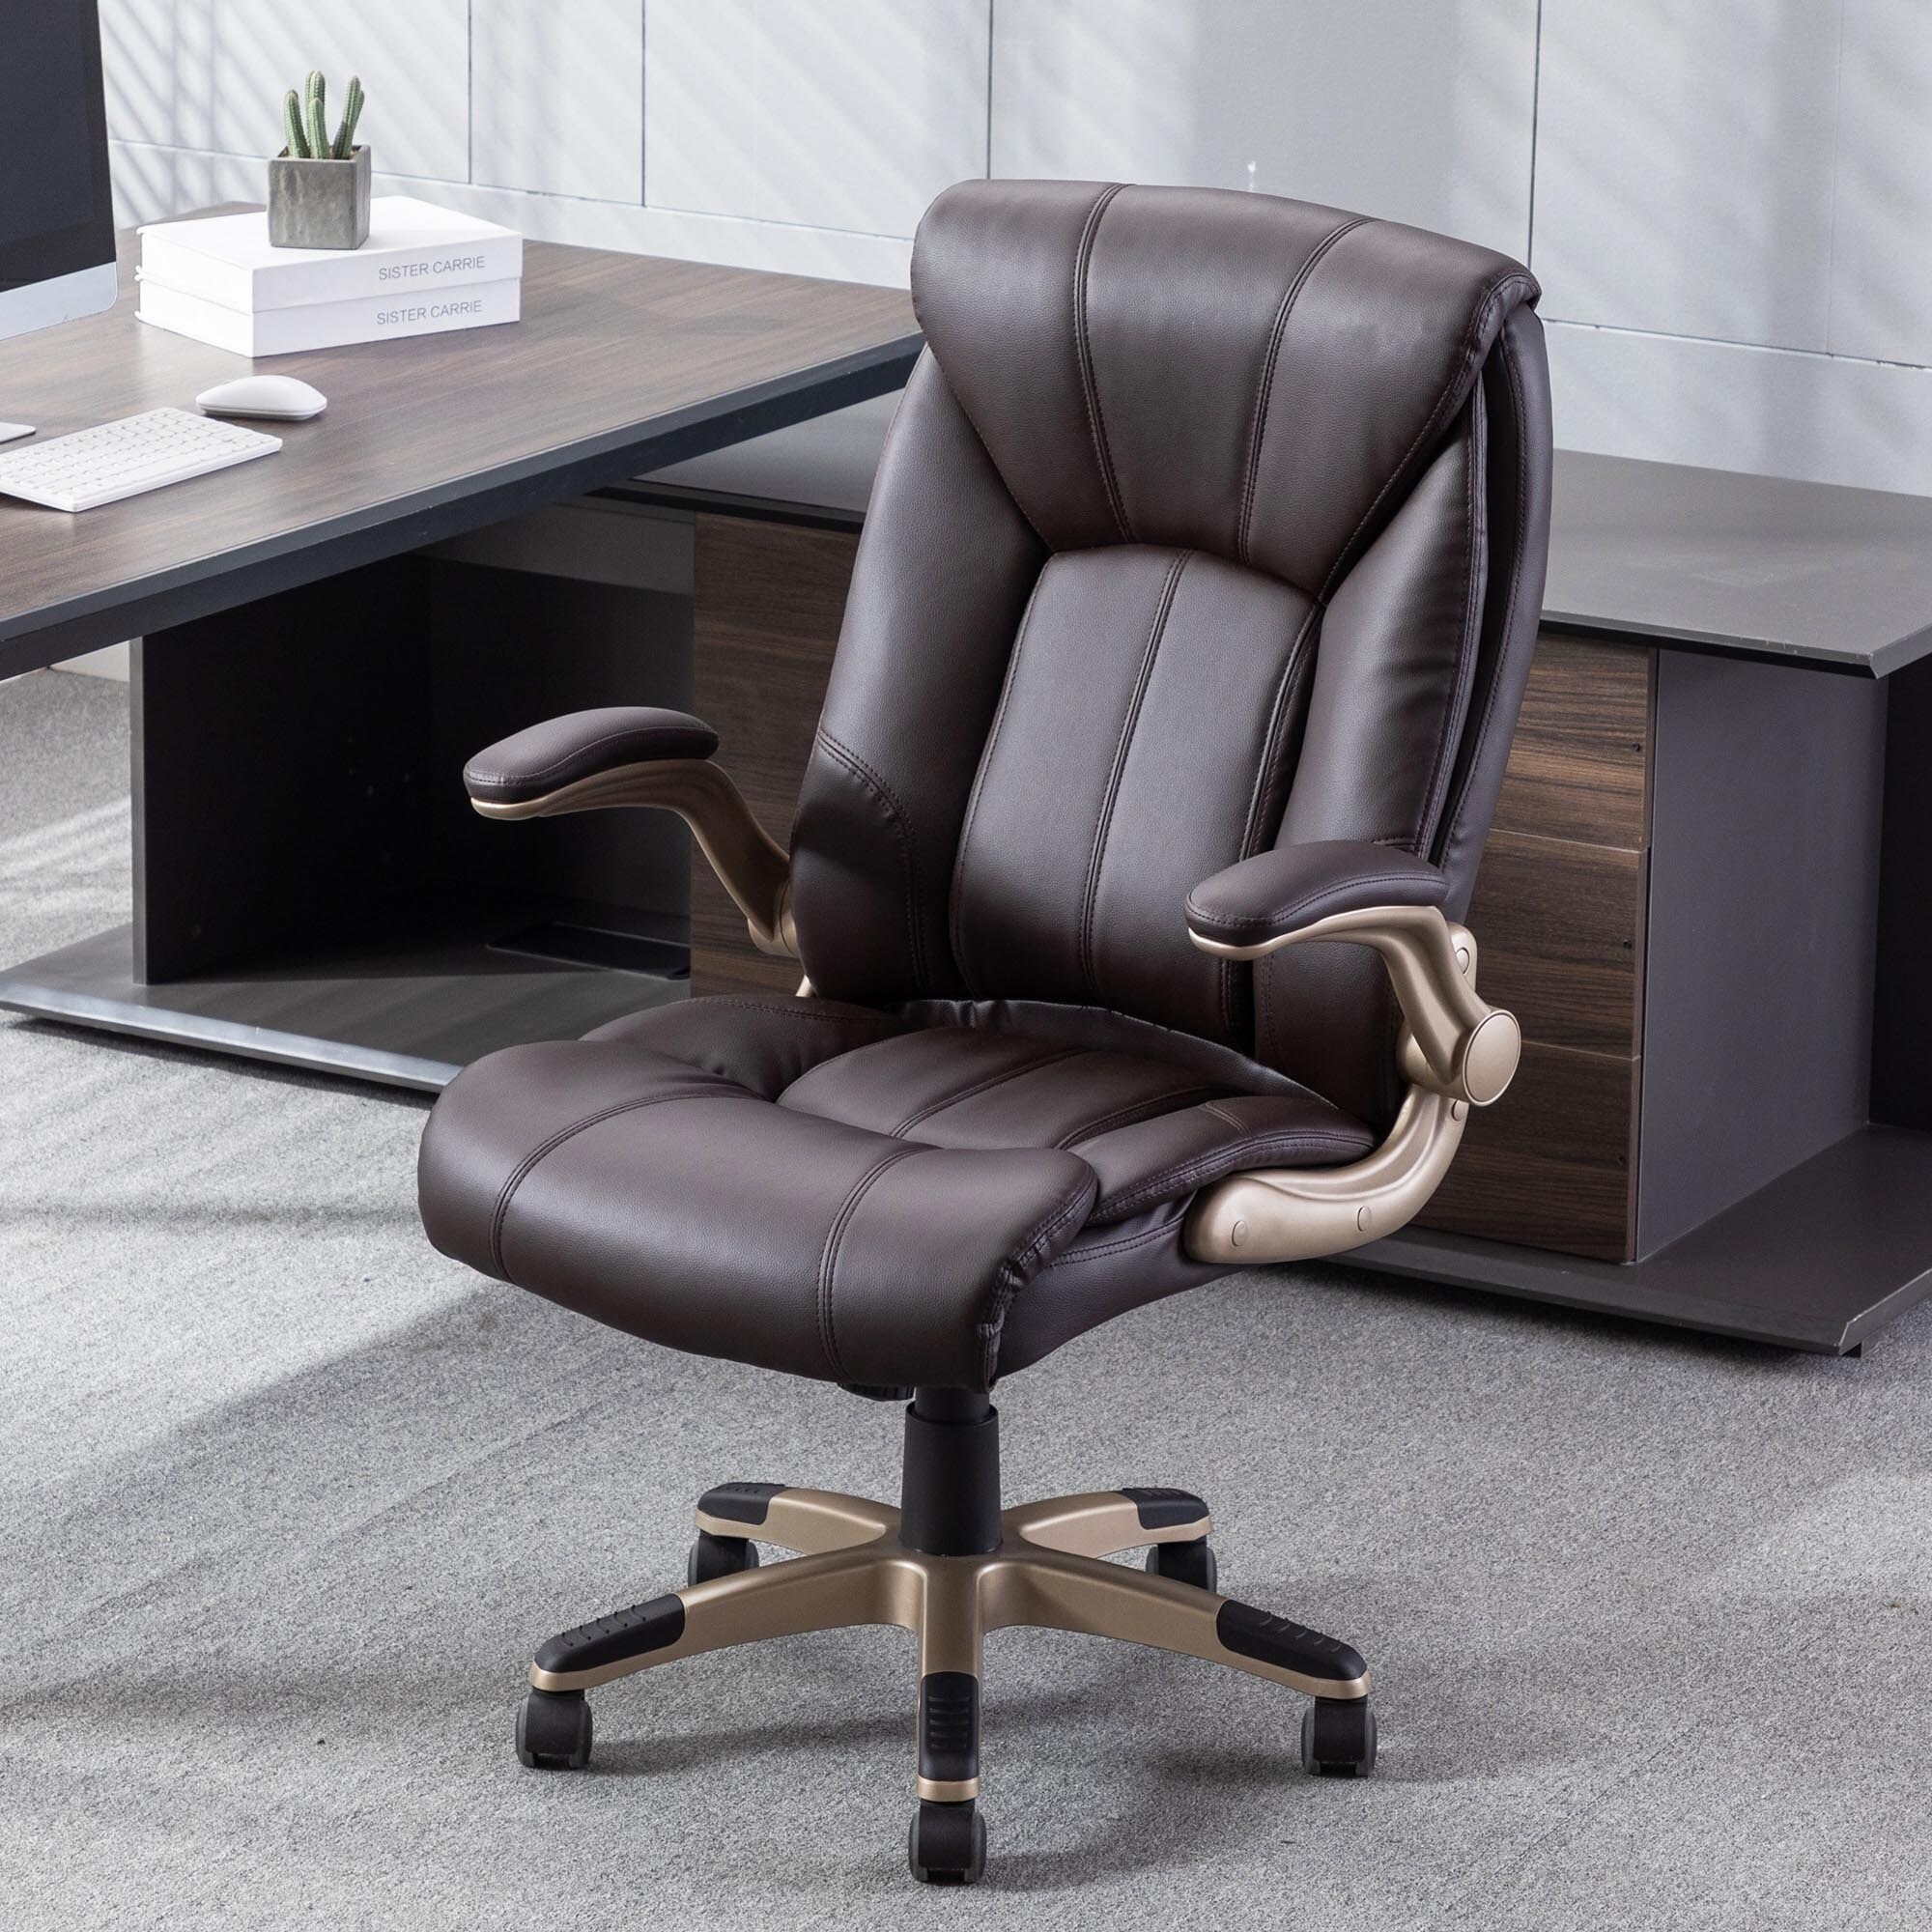 https://ak1.ostkcdn.com/images/products/is/images/direct/1acd1d9a46fb2d93c111f11c670cfe6068b17318/Yingj-Faux-Leather-Big-and-Tall-Executive-Office-Chair.jpg